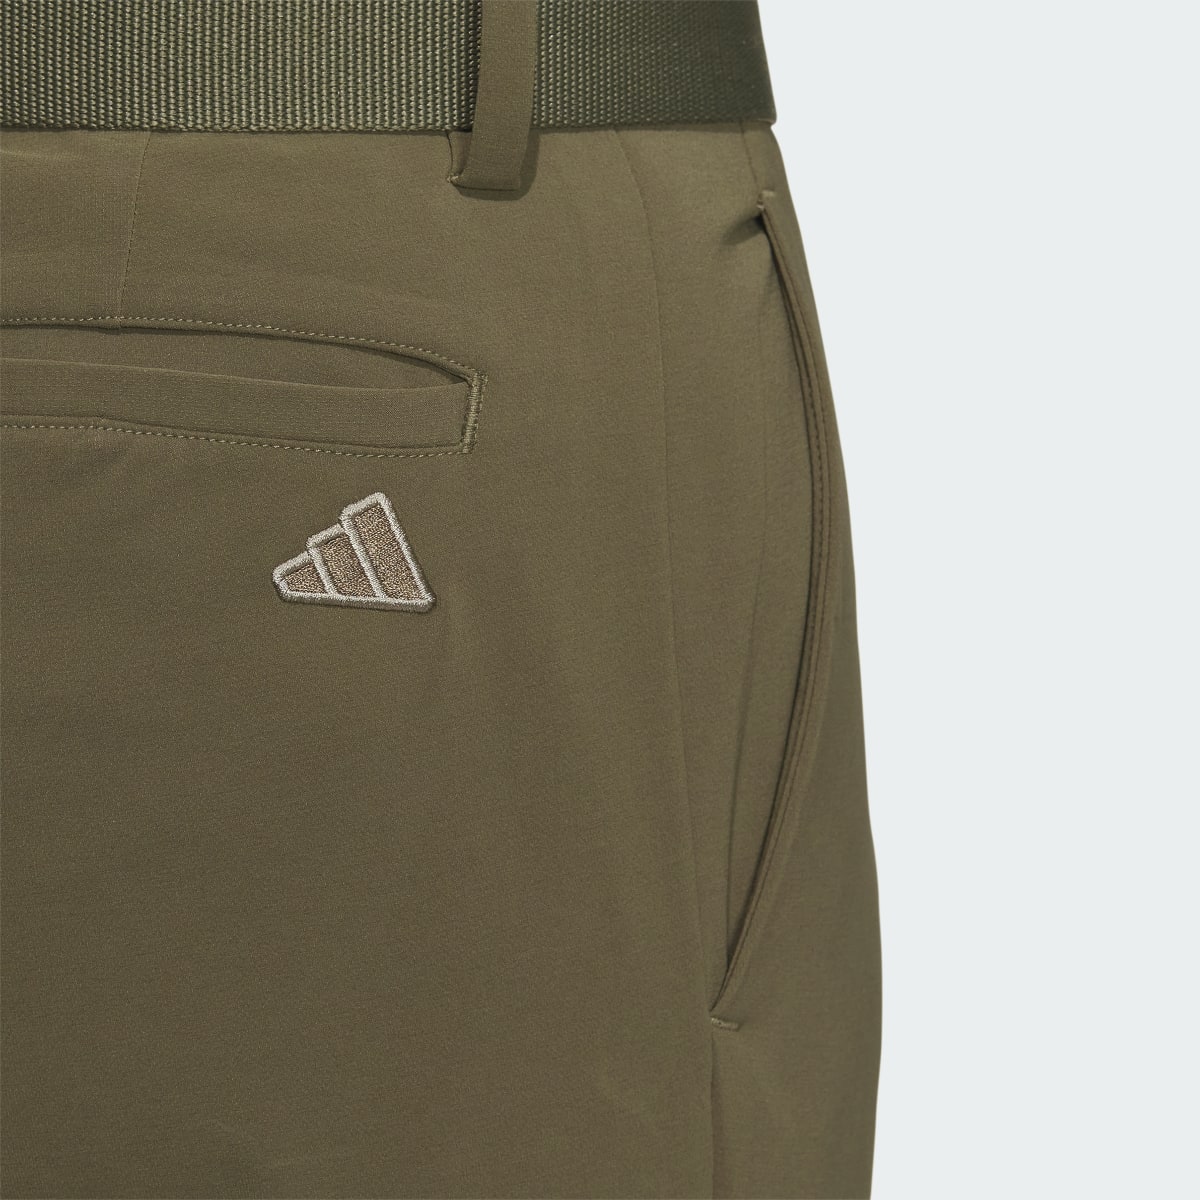 Adidas Go-To Cargo Pocket Long Trousers. 7